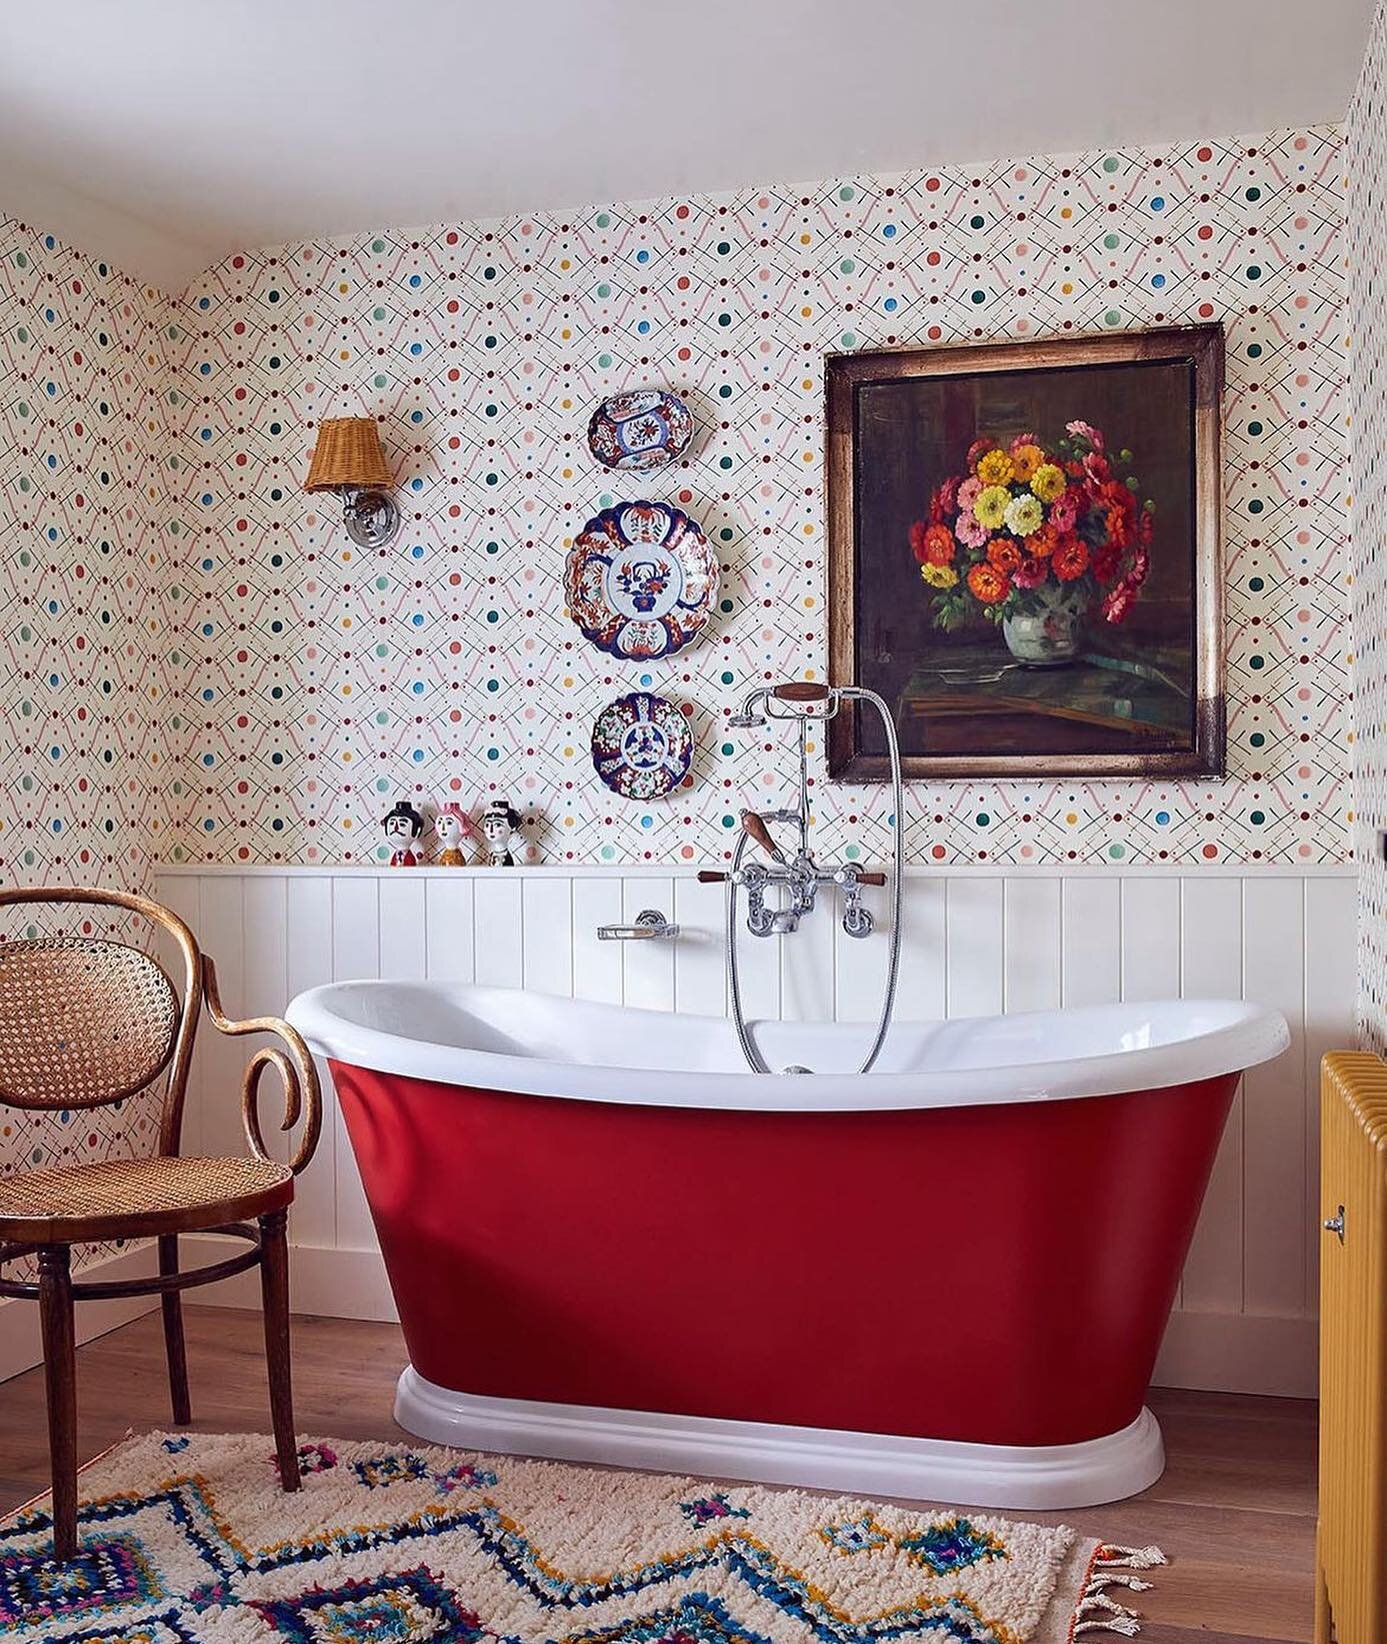 🐞🛁Ladies and gentlemen&hellip; This bath! It&rsquo;s a winner! And of course a sterling performance from this @ottolinedevries wallpaper in @sophierobinsoninteriors bathroom!

.
.
.
.
#ottolinedevries #bathroominspo #bathroom #bathroomdecor #wallpa